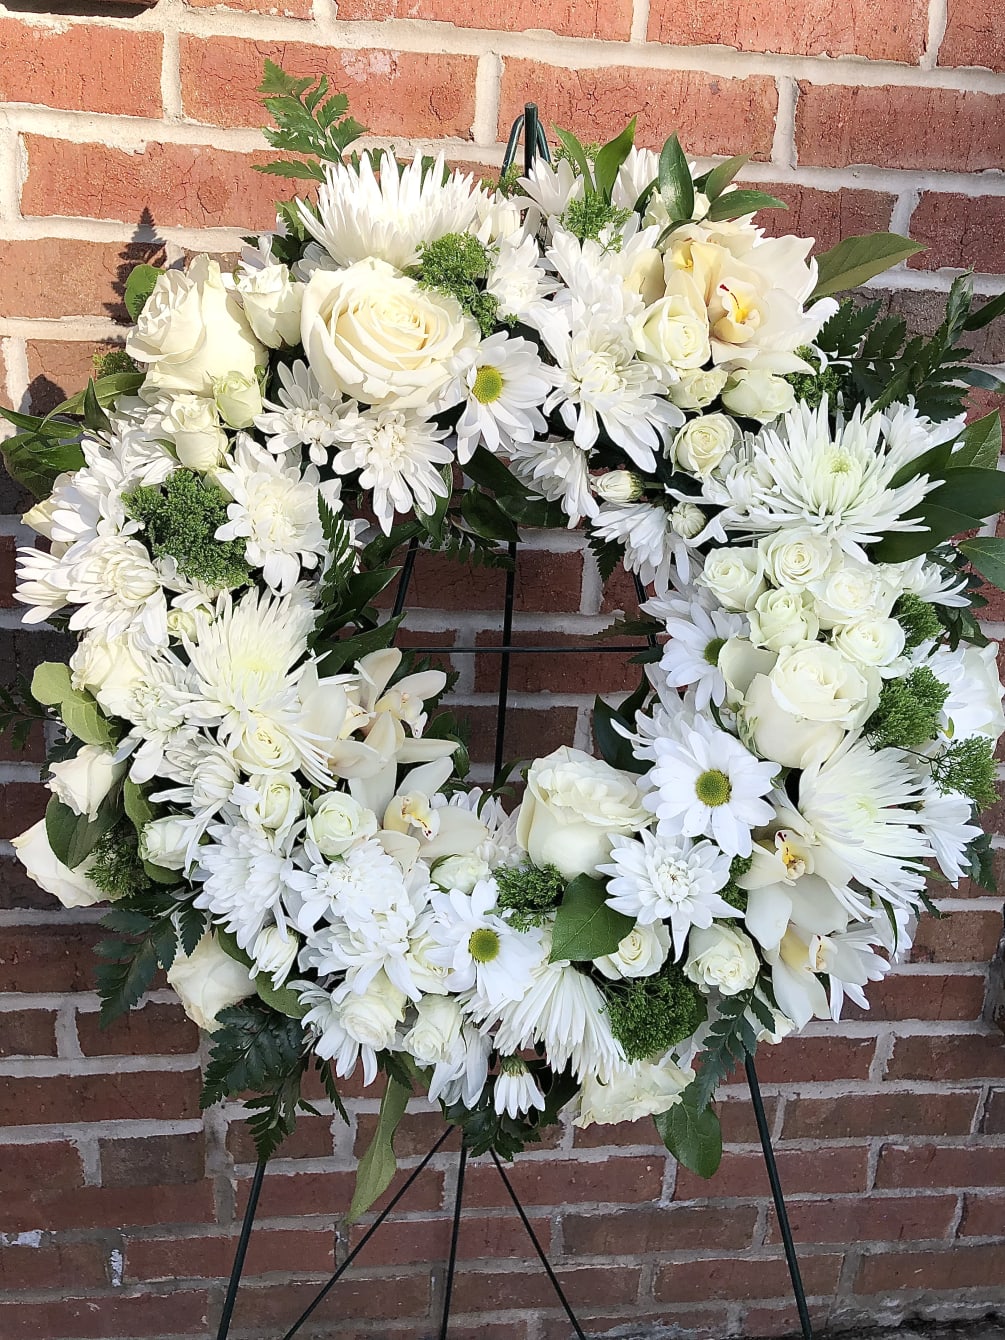 A classic Sympathy Wreath, designed with uplifting, traditional blooms and fresh varied